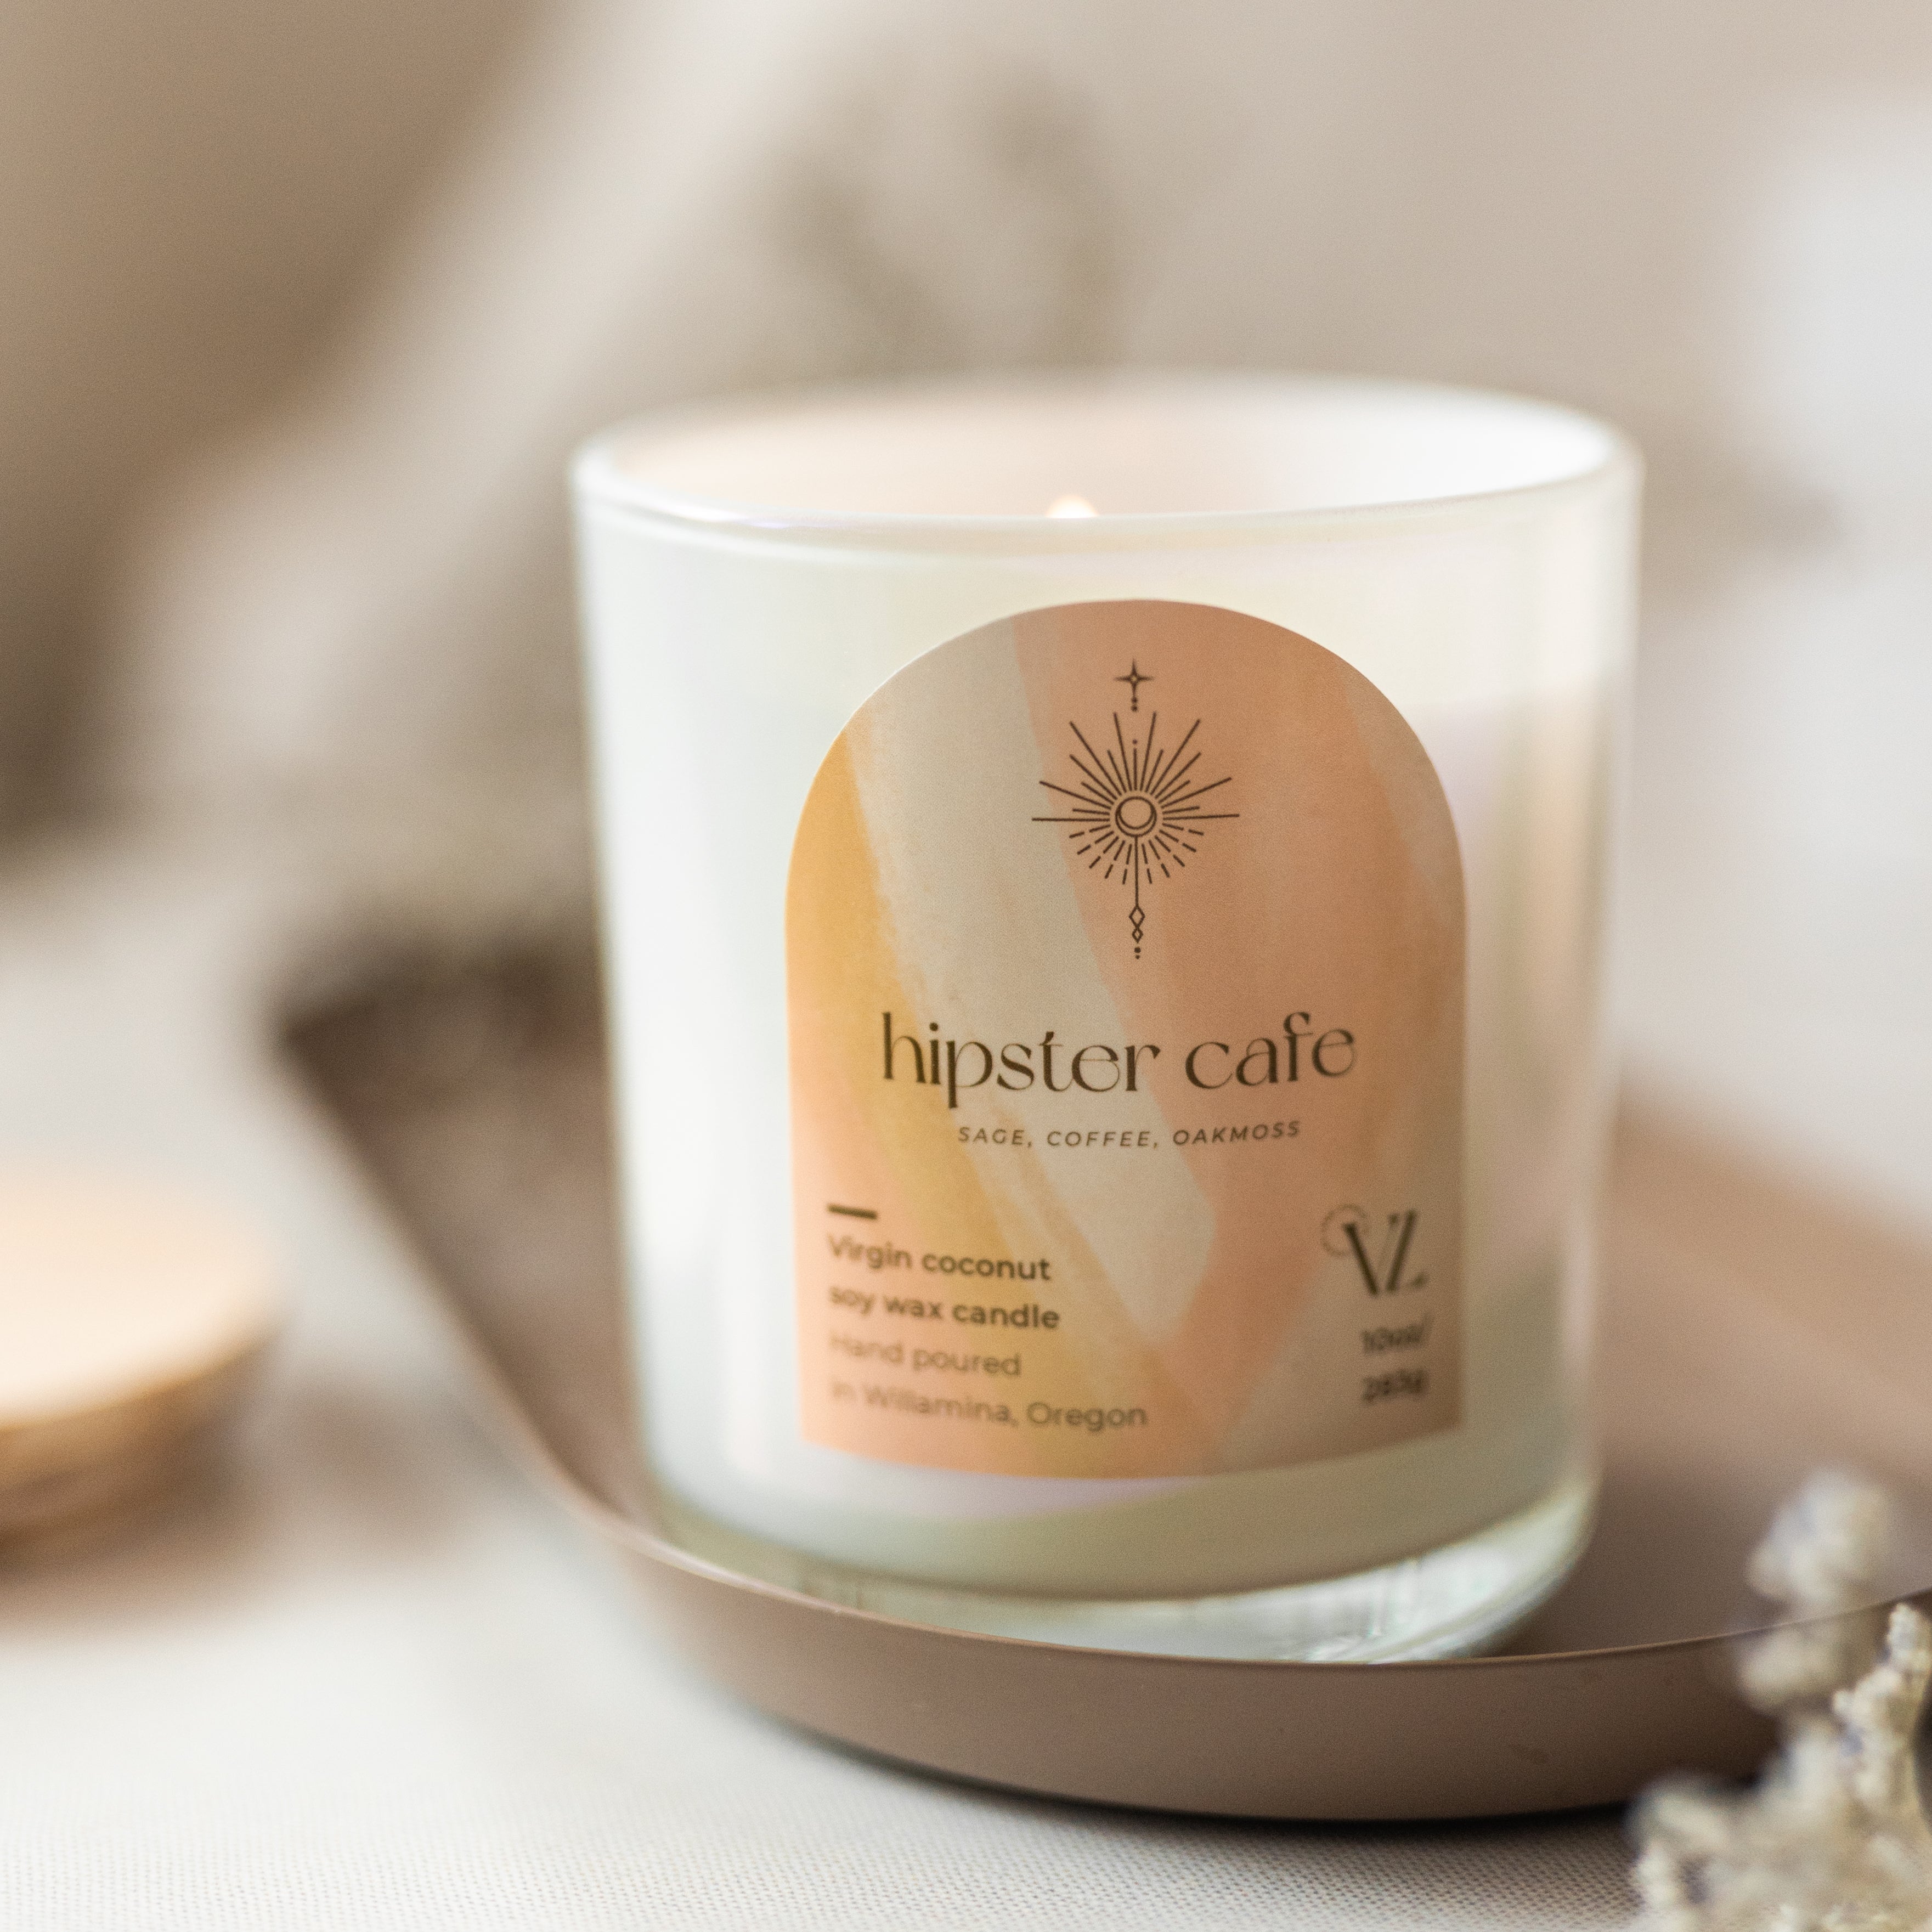 Hipster café coconut soy wax candle, Sage, coffee, oak moss